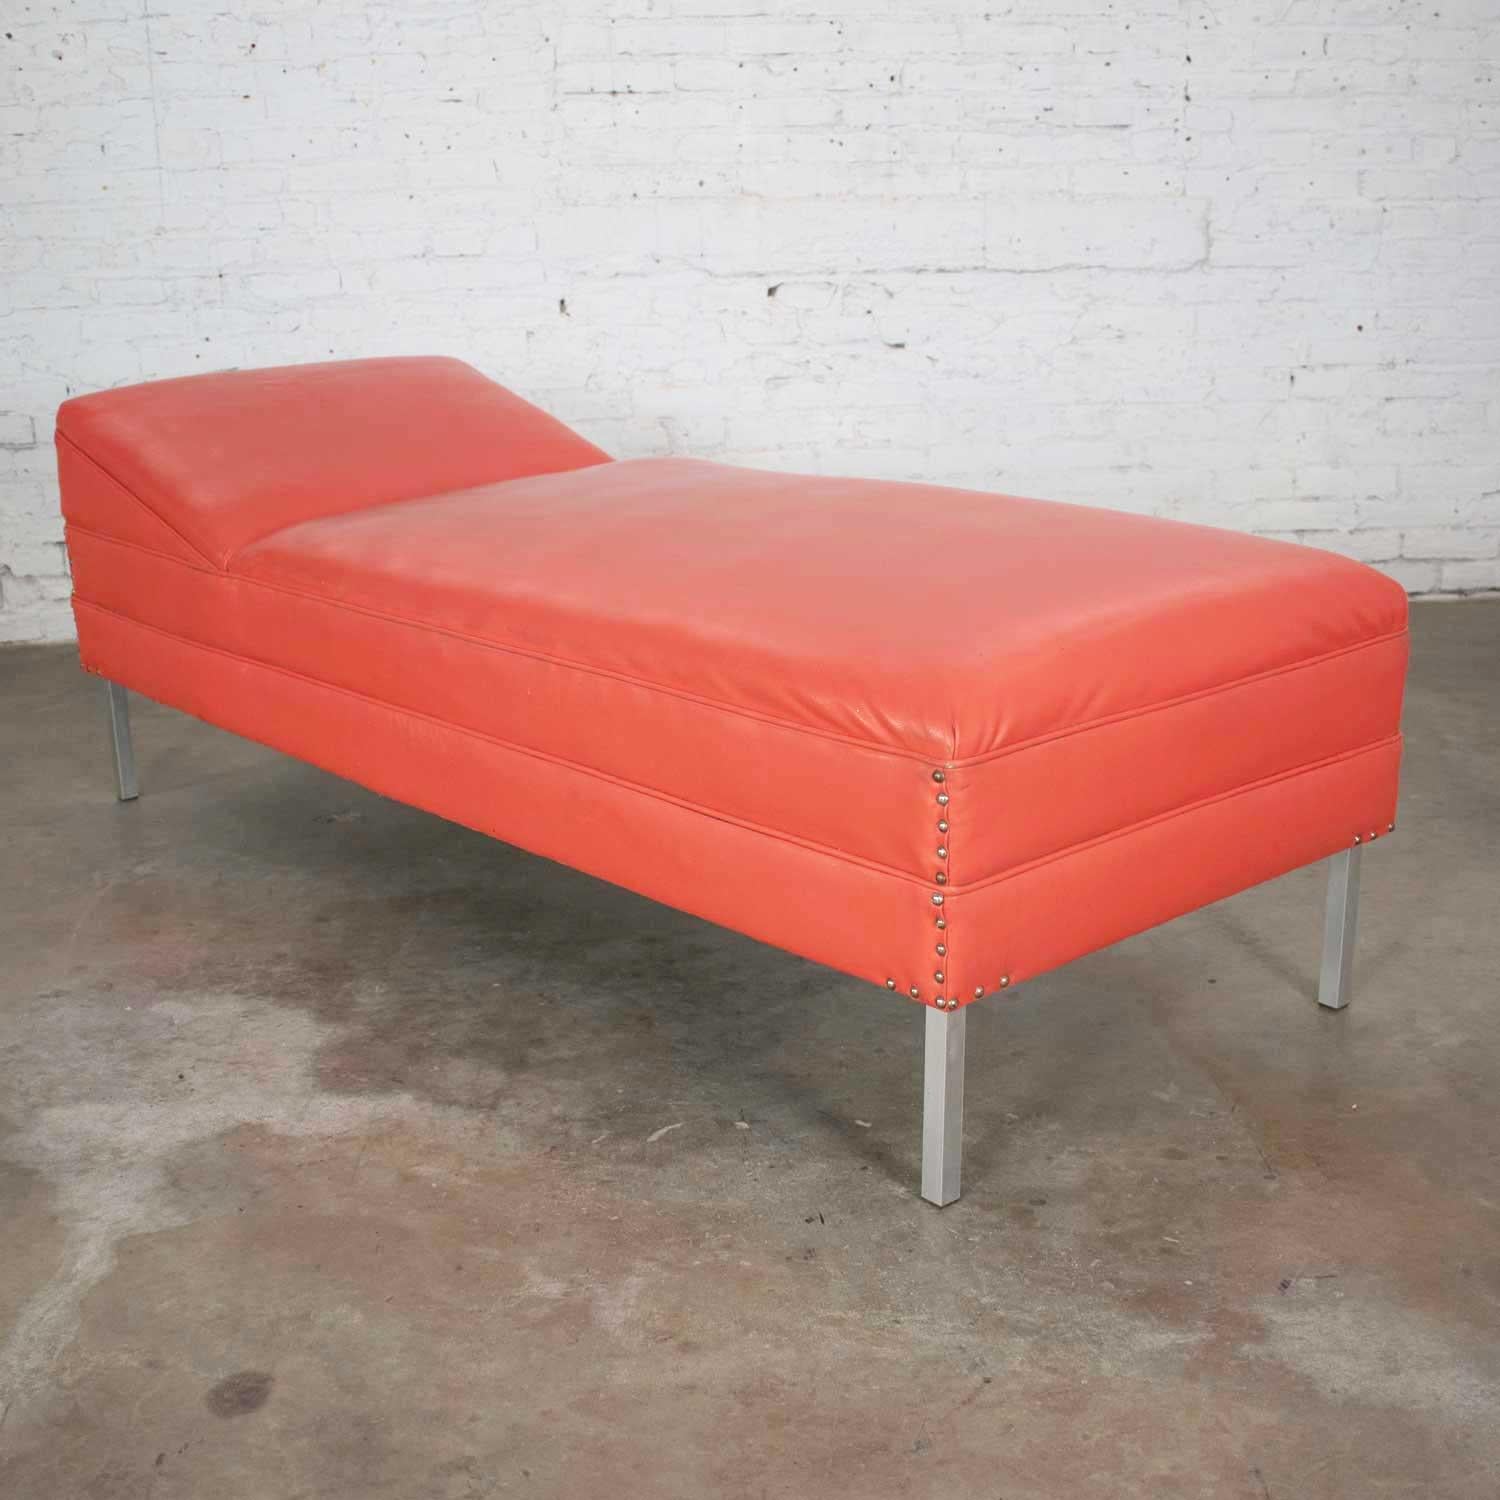 Handsome Mid-Century Modern coral vinyl faux leather and aluminum leg chaise lounge or day bed. It is in good vintage condition. The beautiful original coral colored vinyl has many nicks, holes, dings, and tears. But we have repaired a few and if